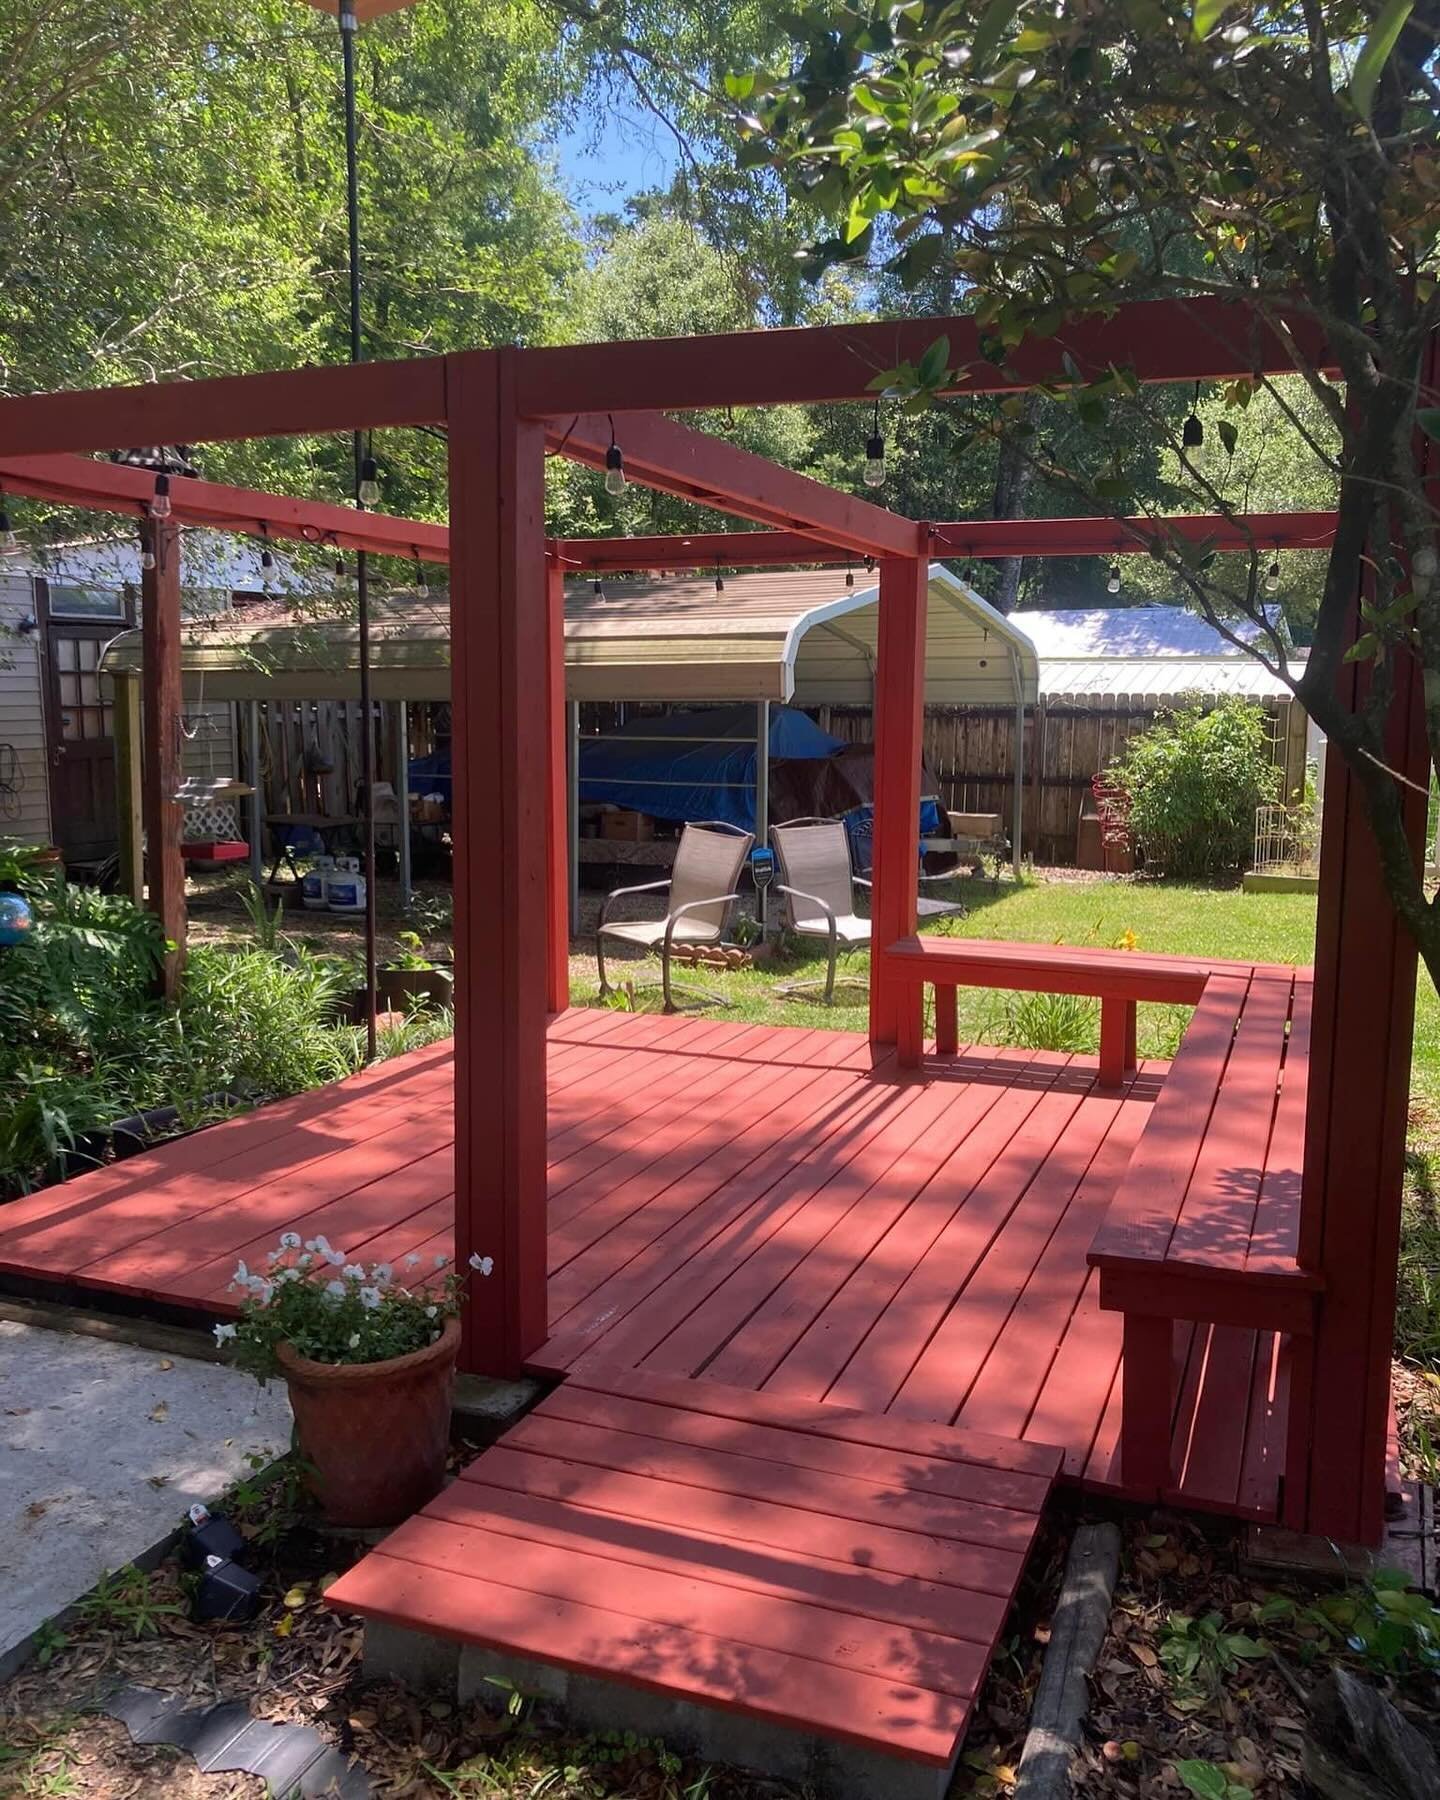 Heck yeah we stain decks! 💯 The warm weather is feeling like it&rsquo;s here to stay what better way to kick off barbecue season than to get some work done to your outside spaces. 

Estimates are always FREE, give us a call!☎️

#deckstaining #woodst